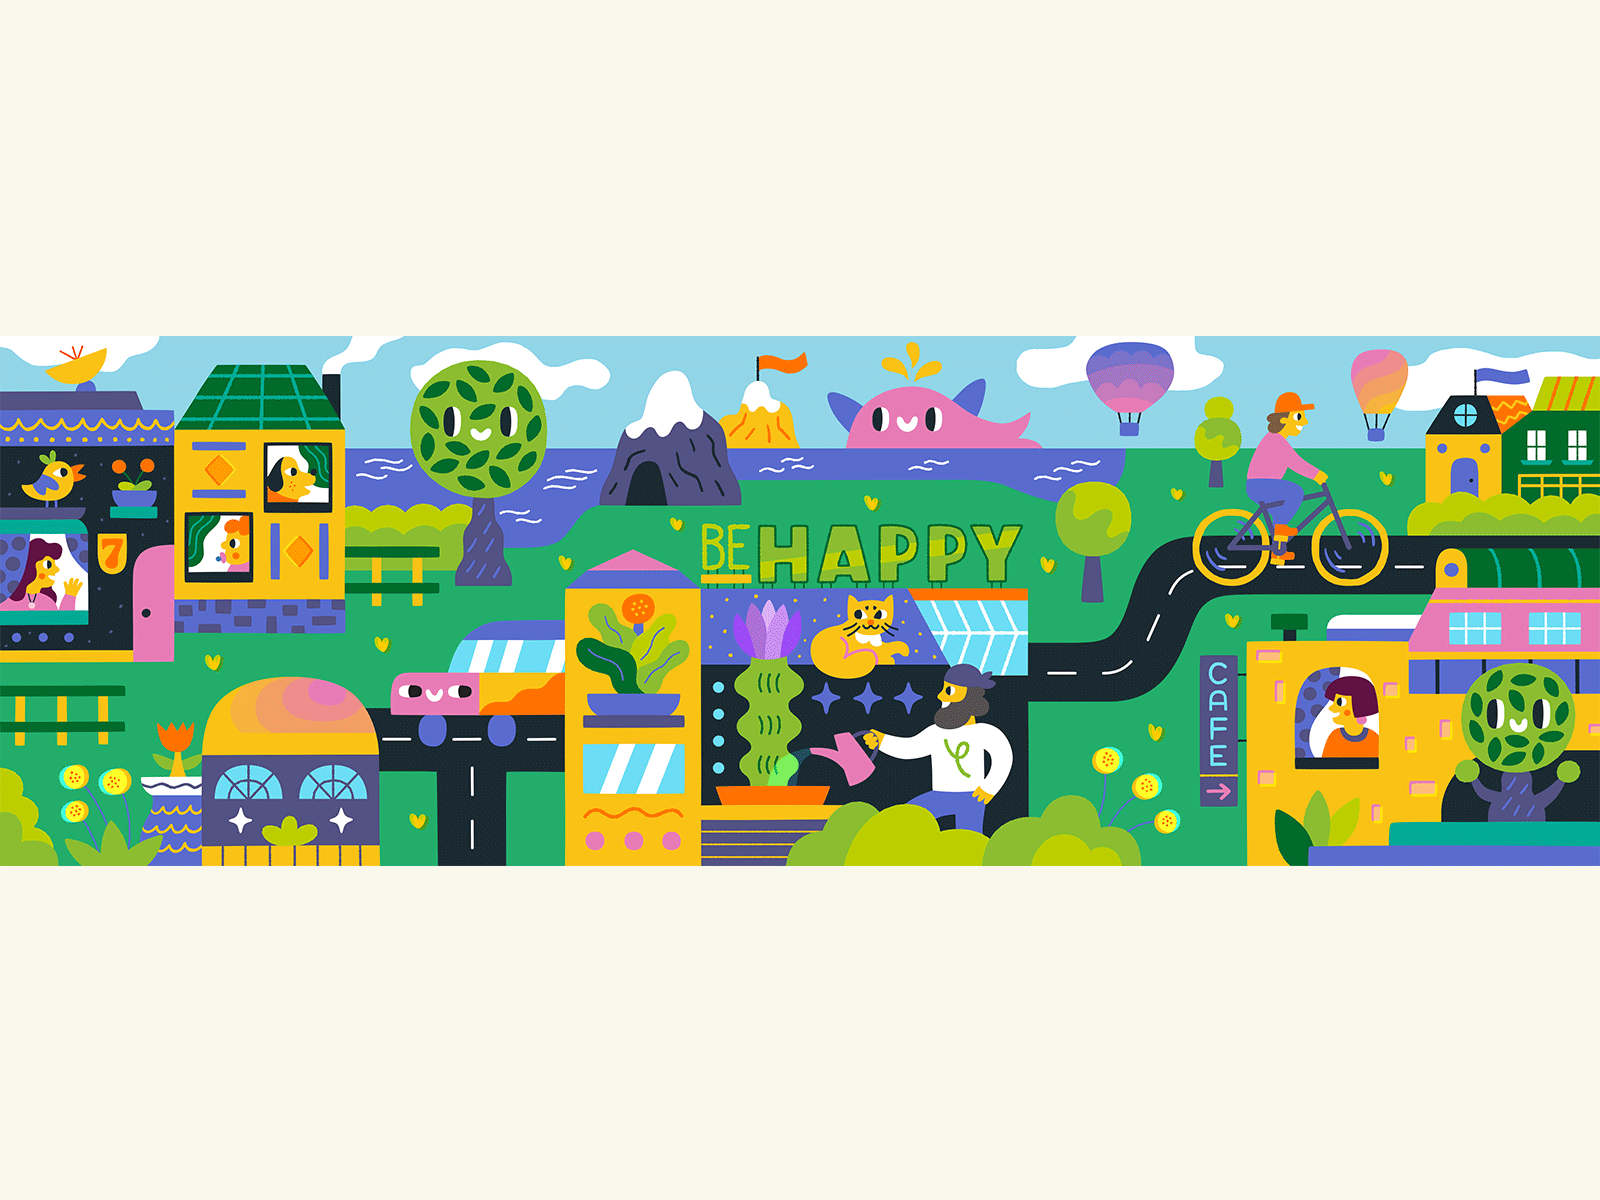 ✴ Happy city ✴ art bird bycicle cat character city day drawing fun hand drawn happy home illustration joy nature people town vector whale